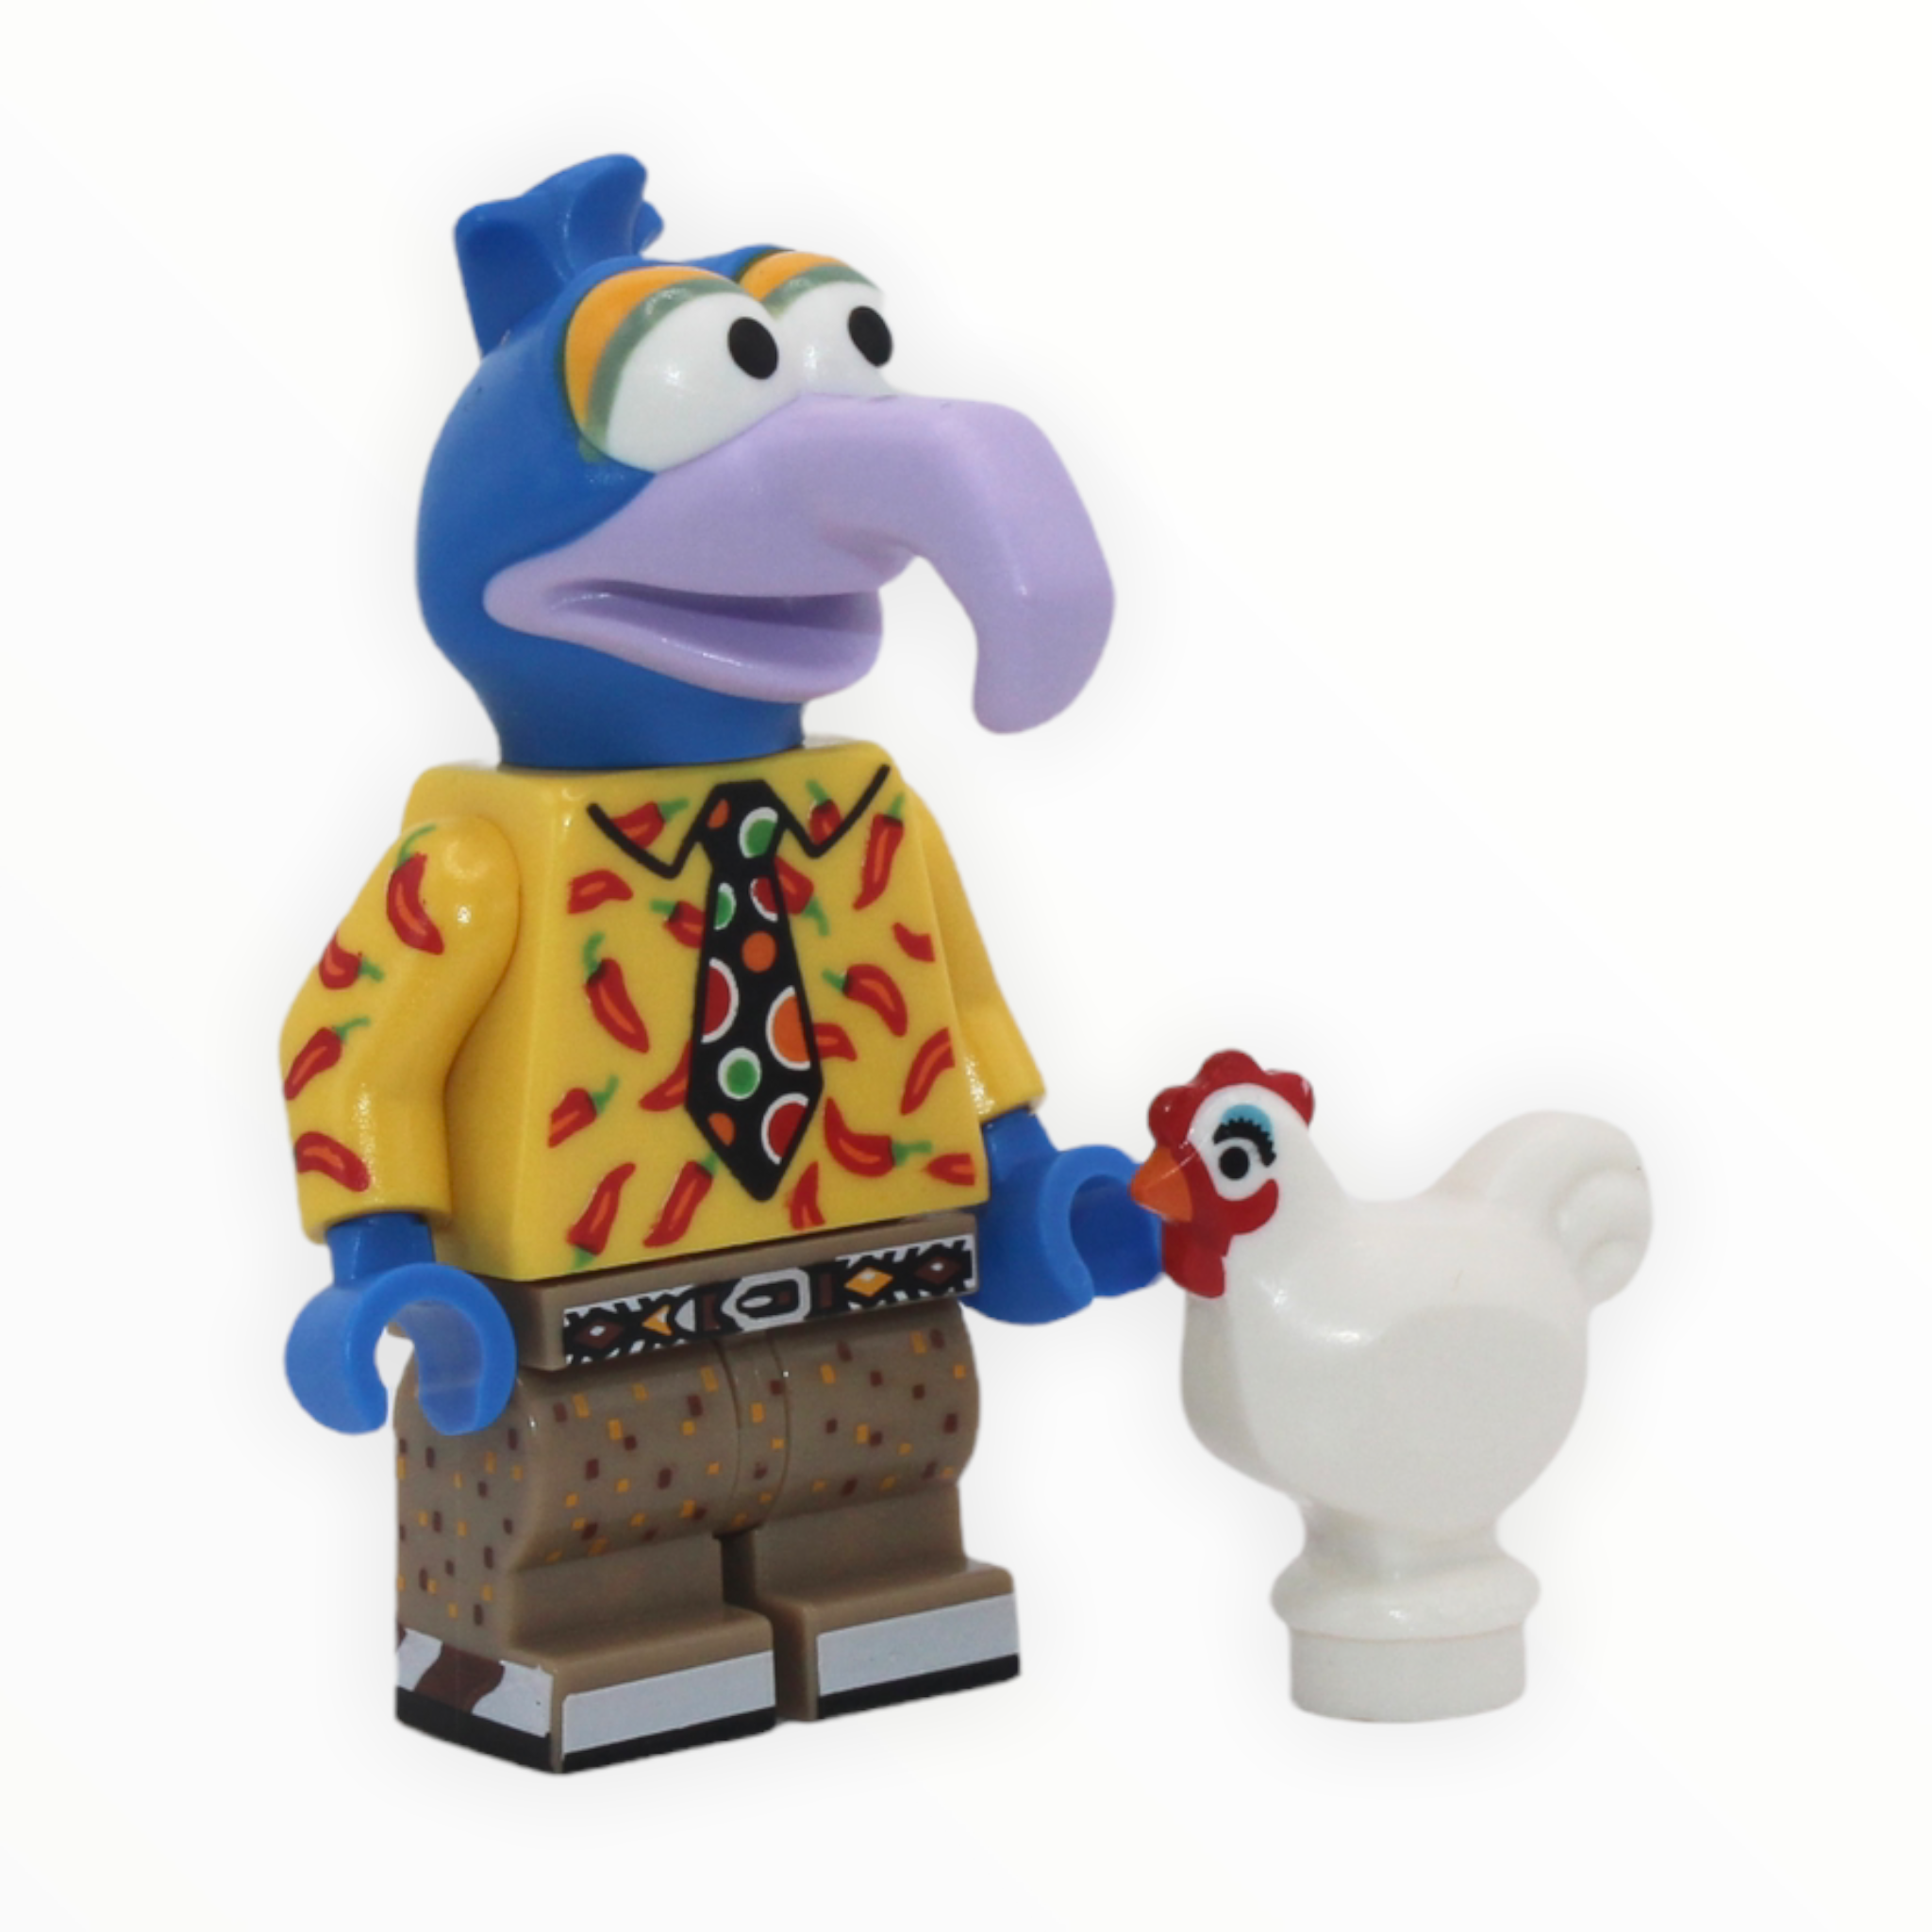 The Muppets Series: Gonzo